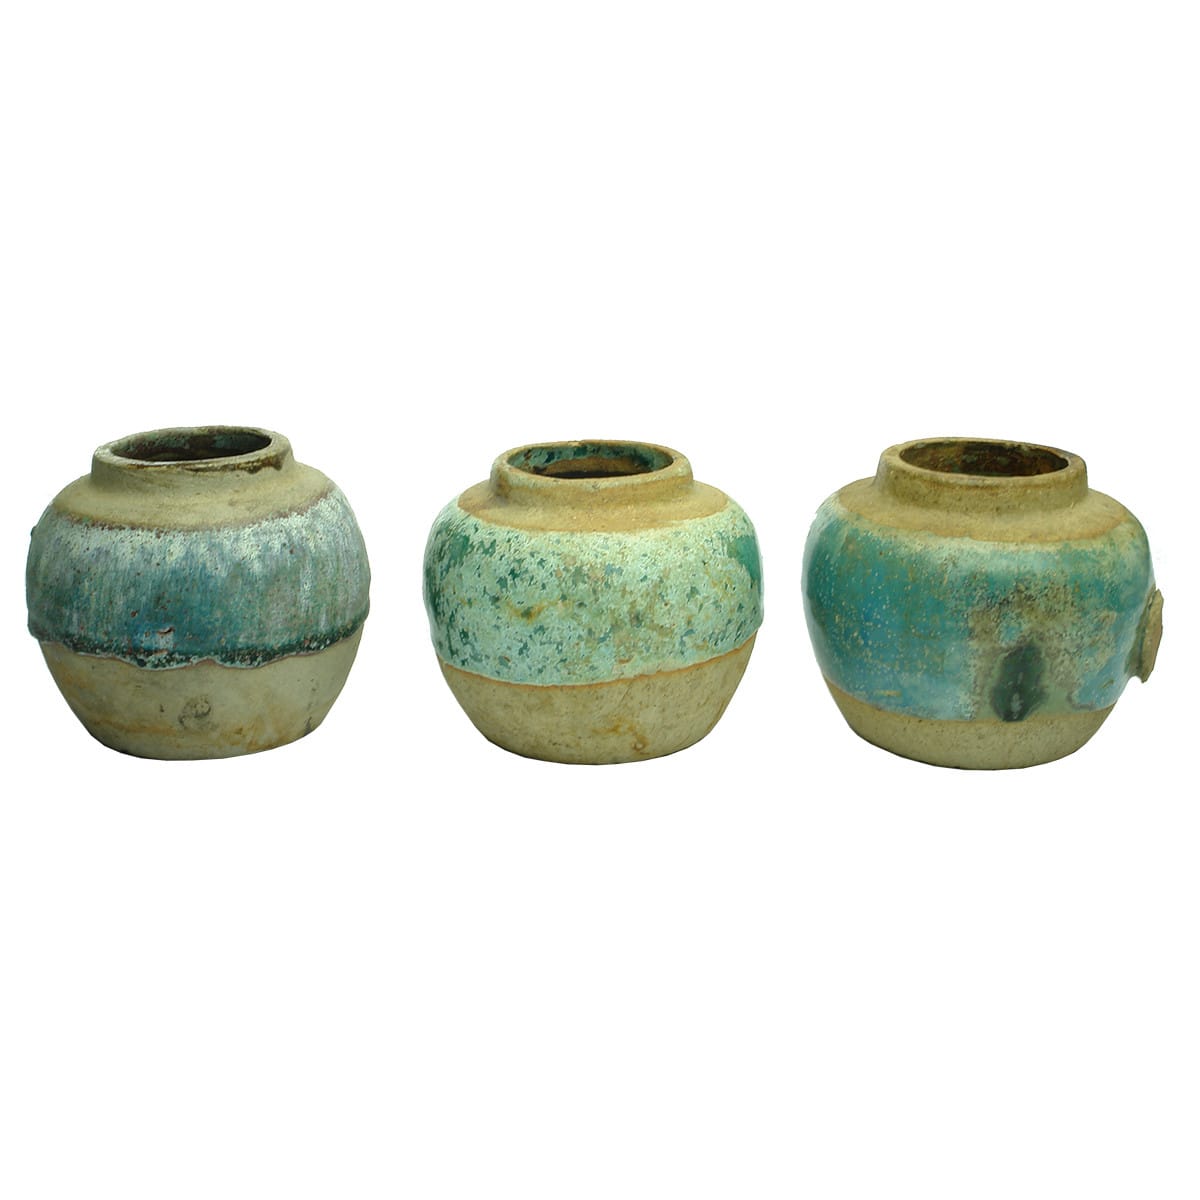 3 small Green or Greenish glazed Chinese Ginger Jars.